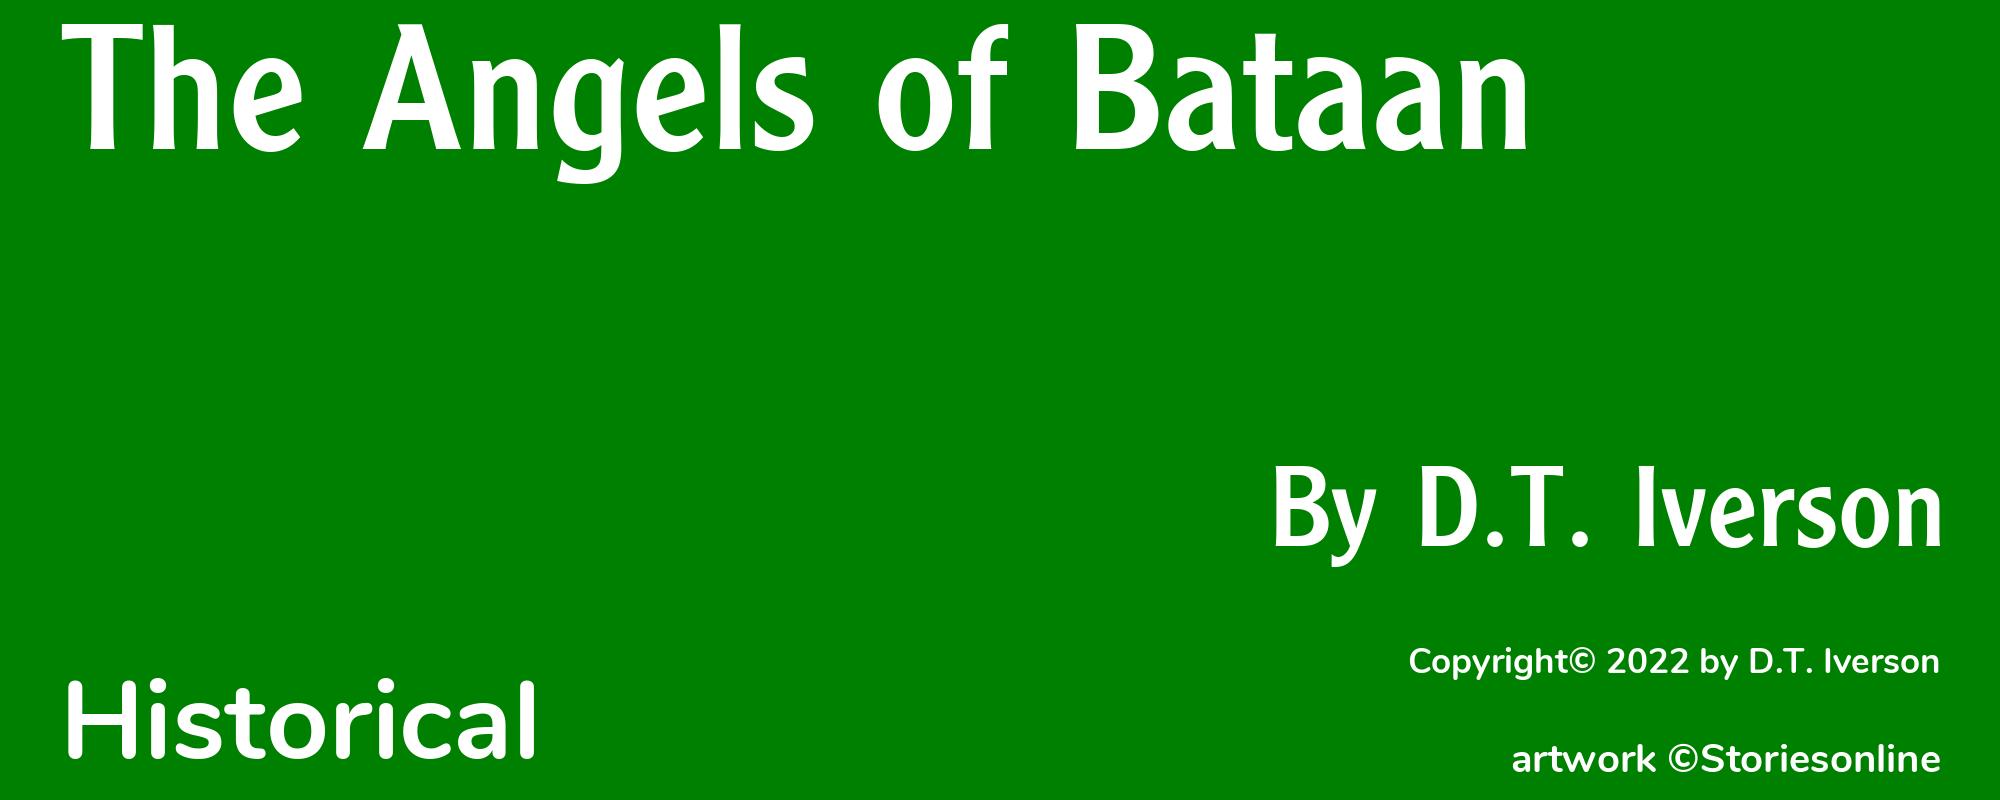 The Angels of Bataan - Cover